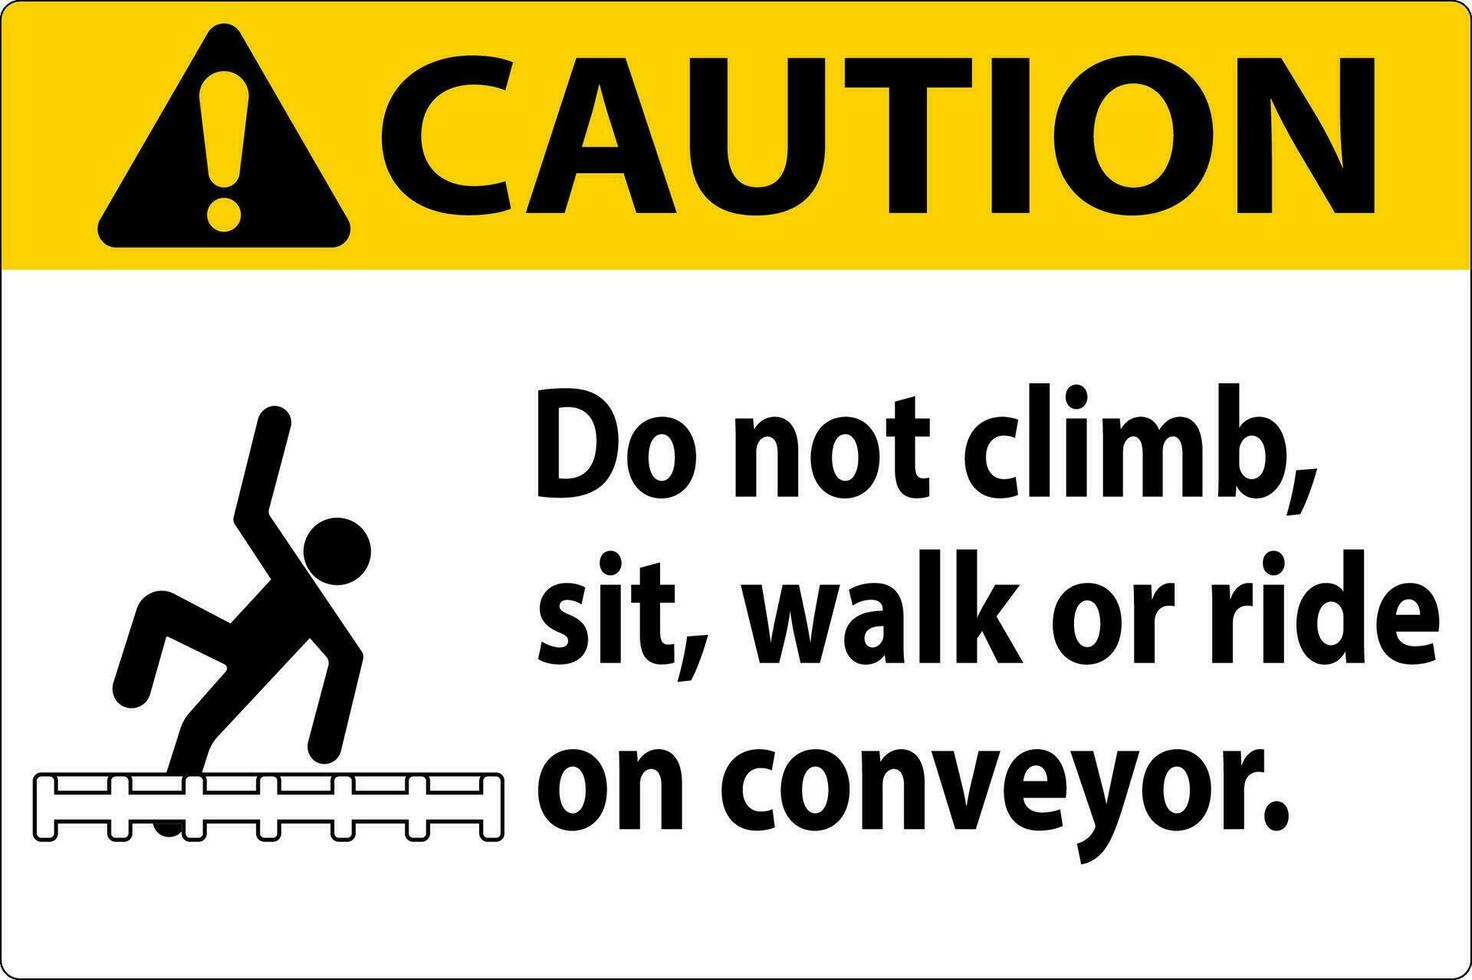 Caution Label Do Not Climb, Sit, Walk or Ride on Conveyor vector